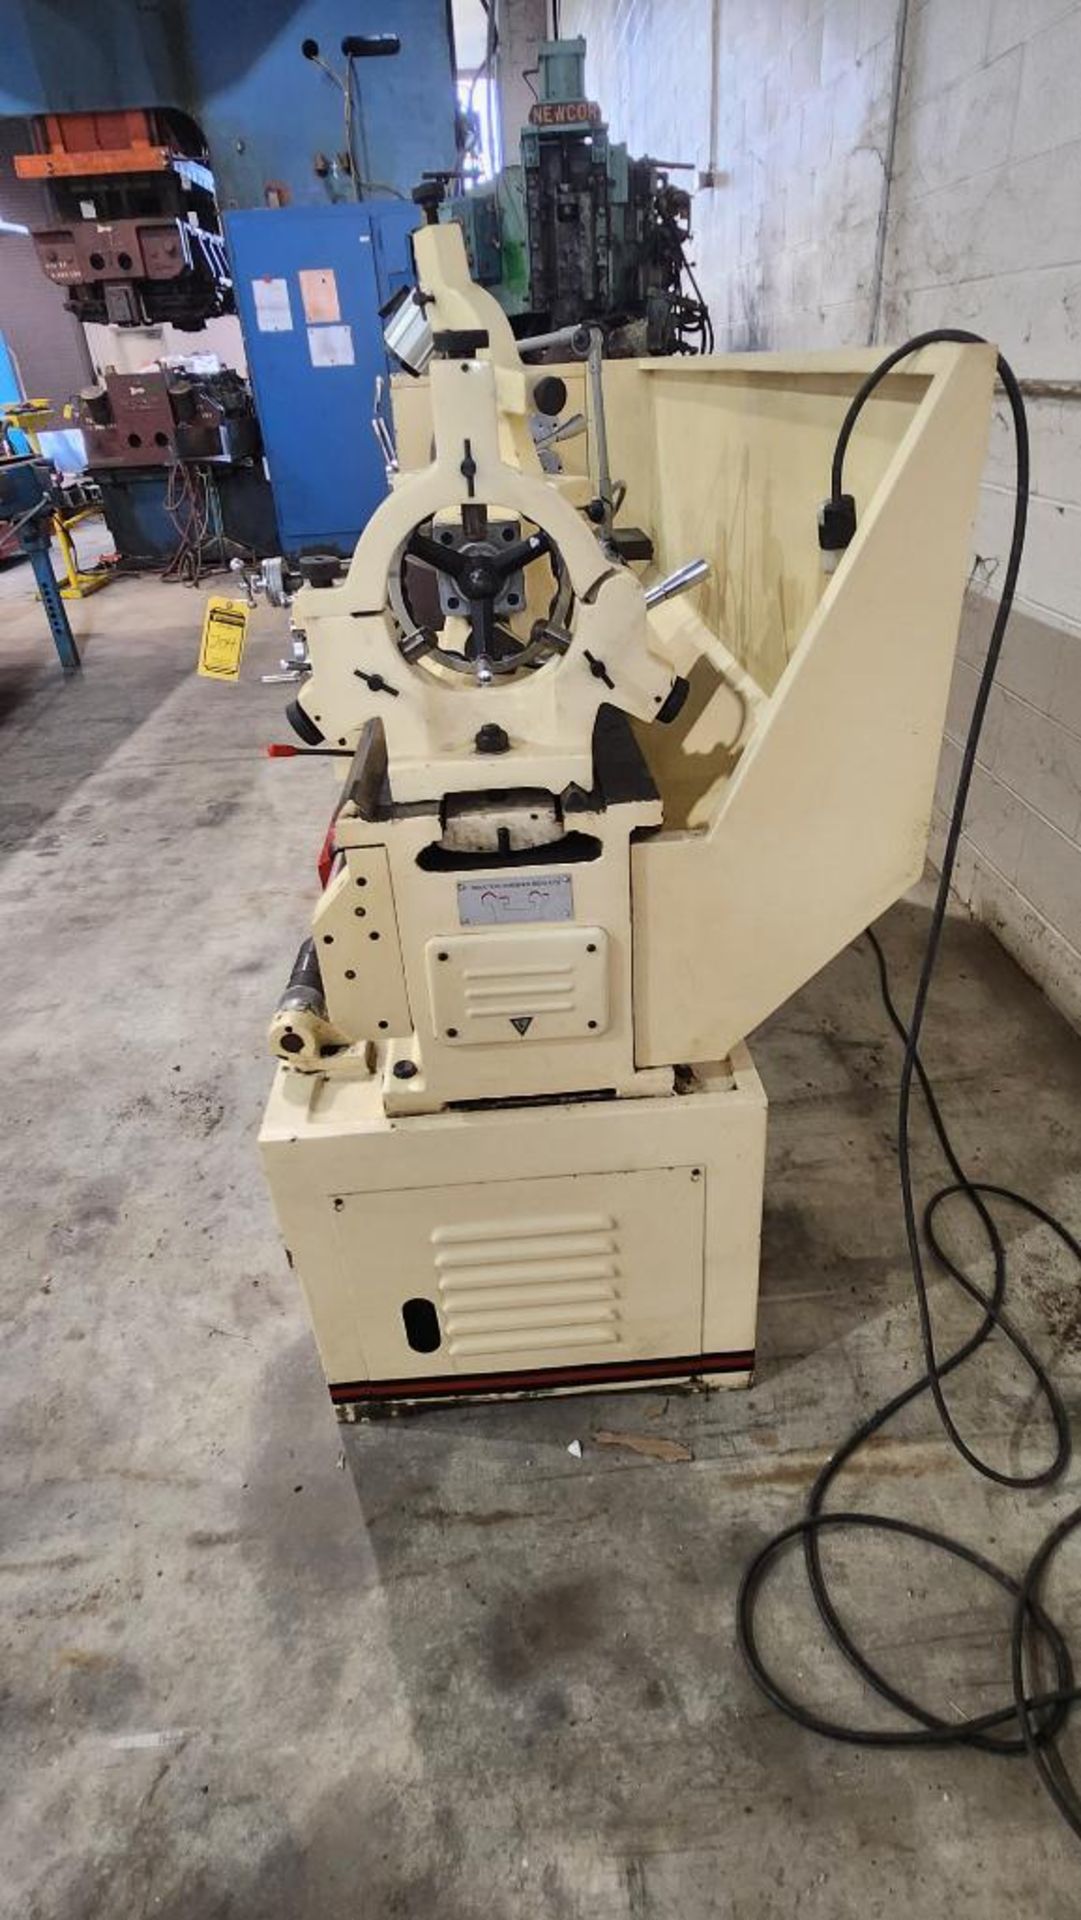 Jet Geared Head Precision Lathe, Model GH-1460ZX, S/N 000821ZX204, 230V/460V, 3-Phase - Image 5 of 14